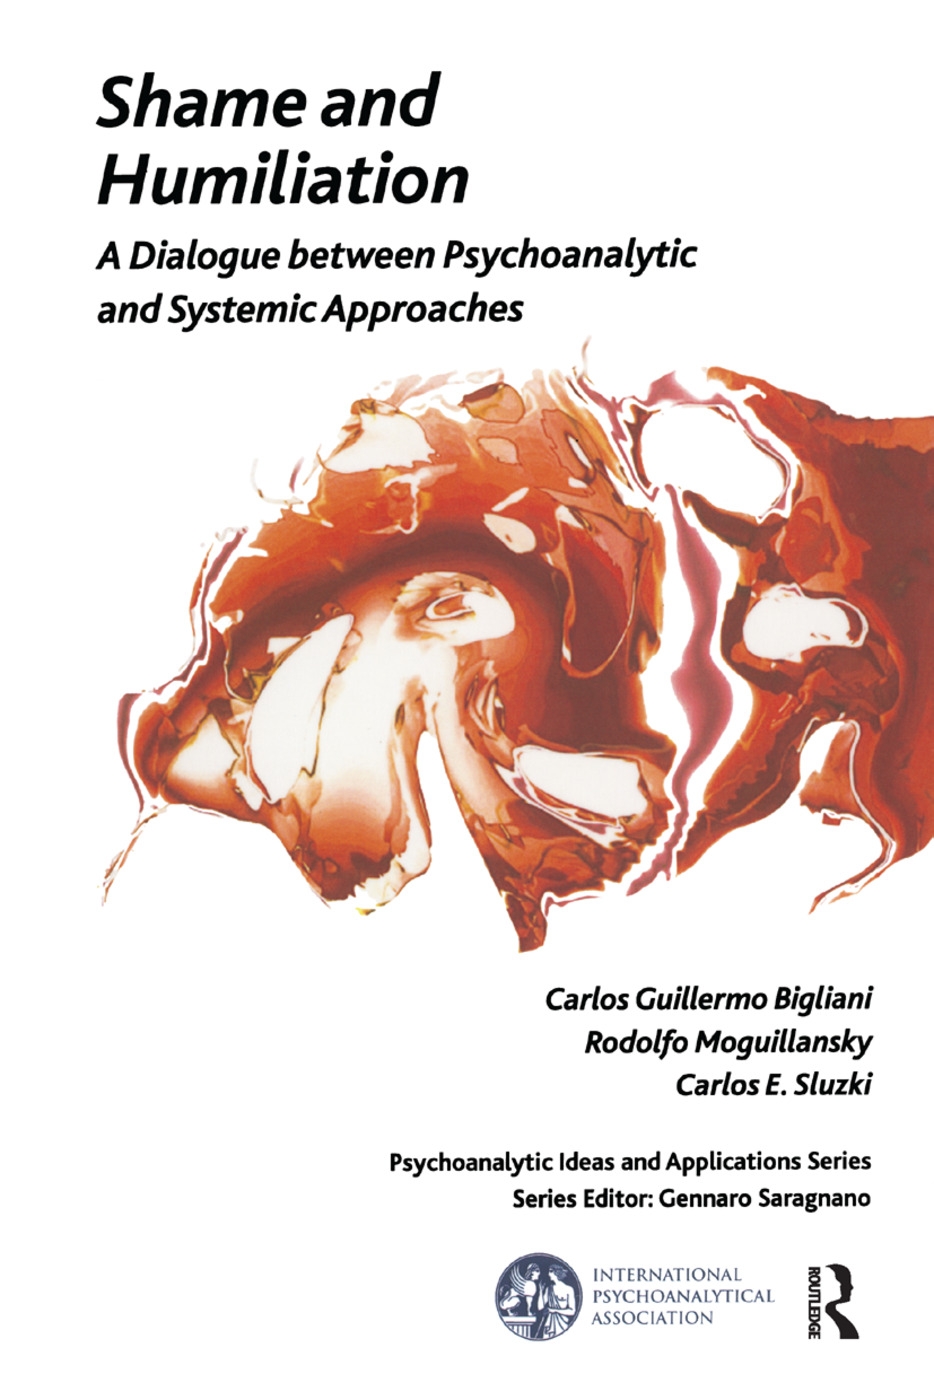 Shame and Humiliation: A Dialogue Between Psychoanalytic and Systemic Approaches